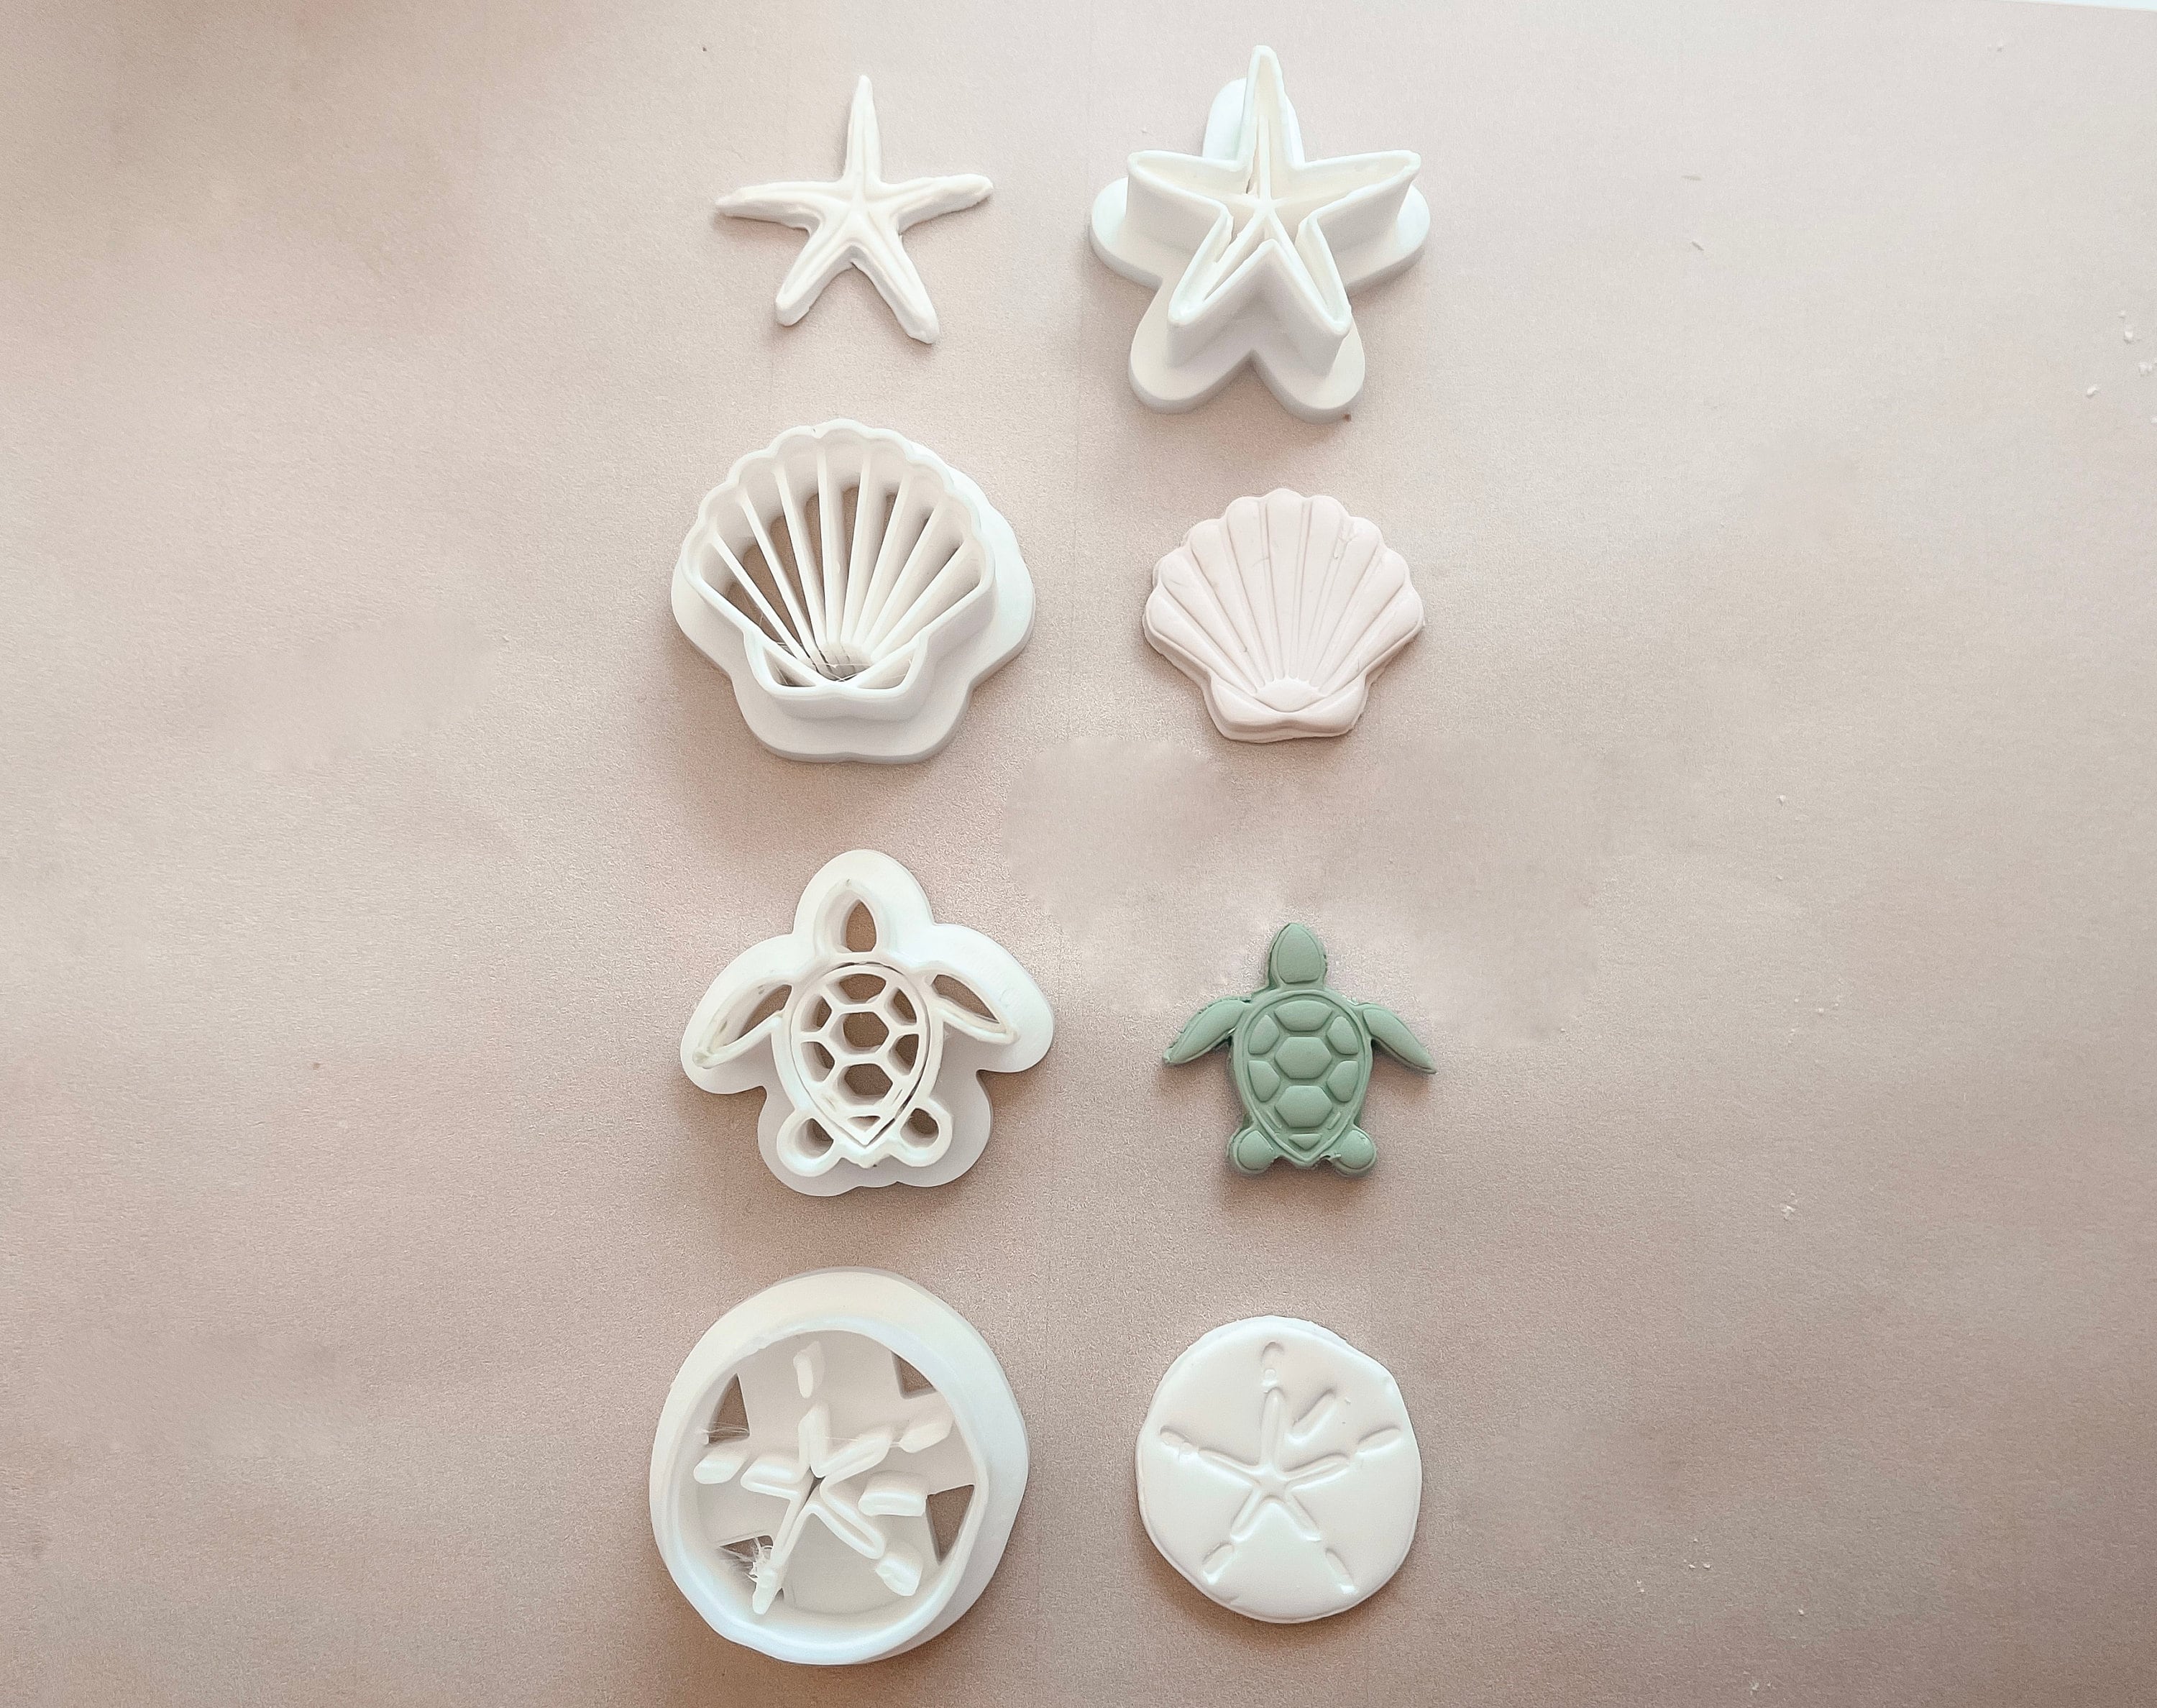 Polymer Clay Stamps - Wave Clay Stamp, Ocean Clay Stamp